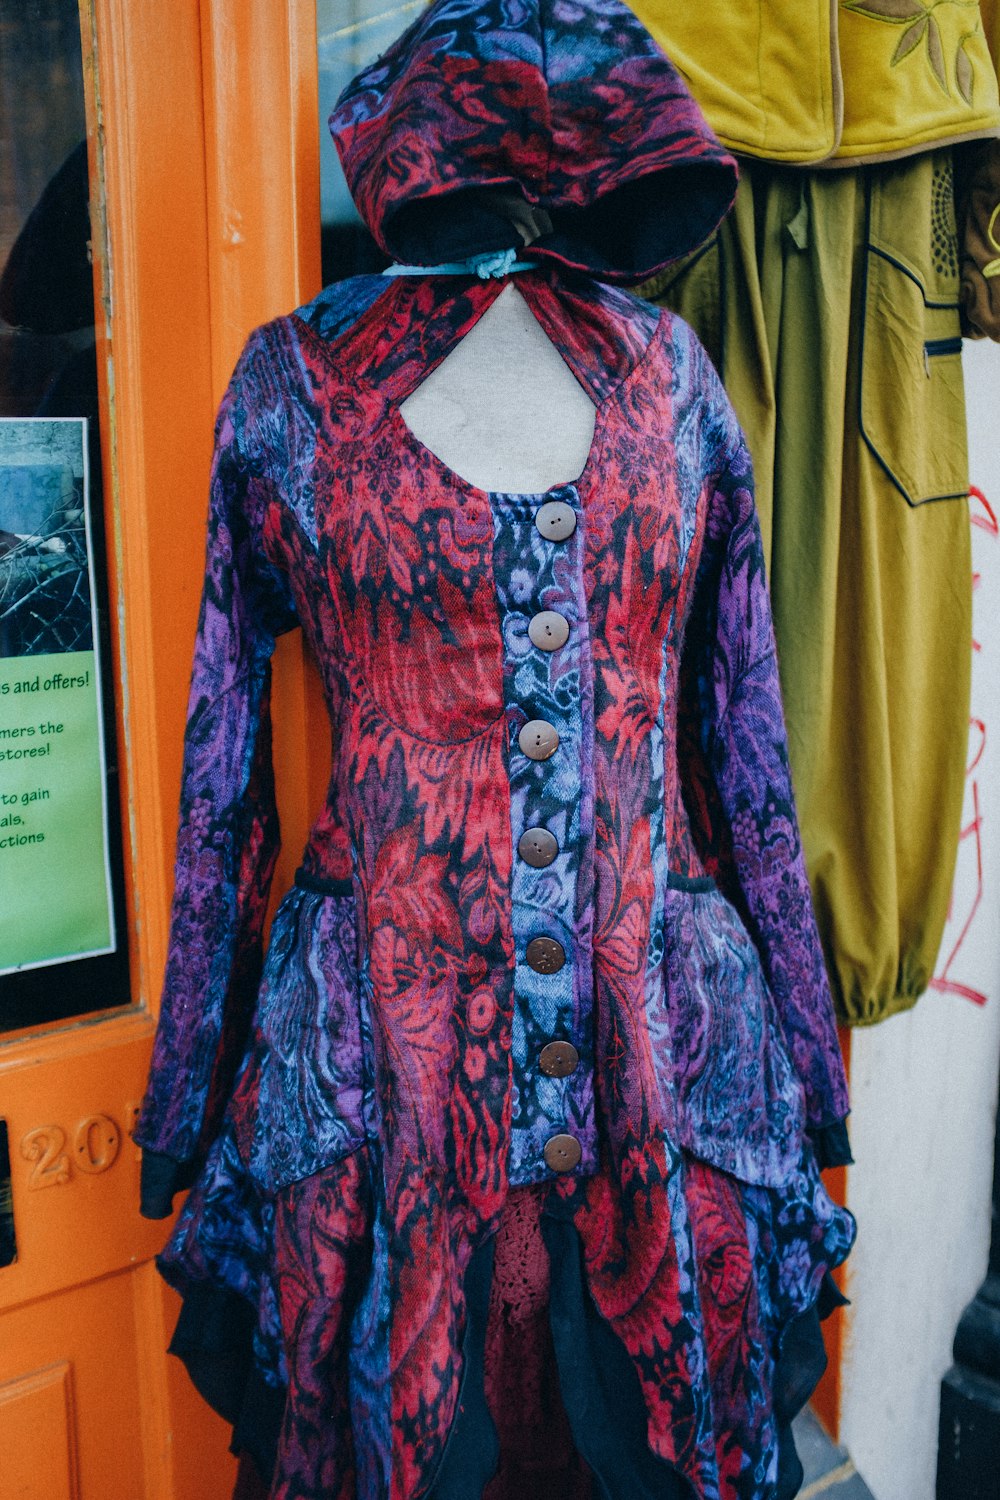 a colorful dress on display